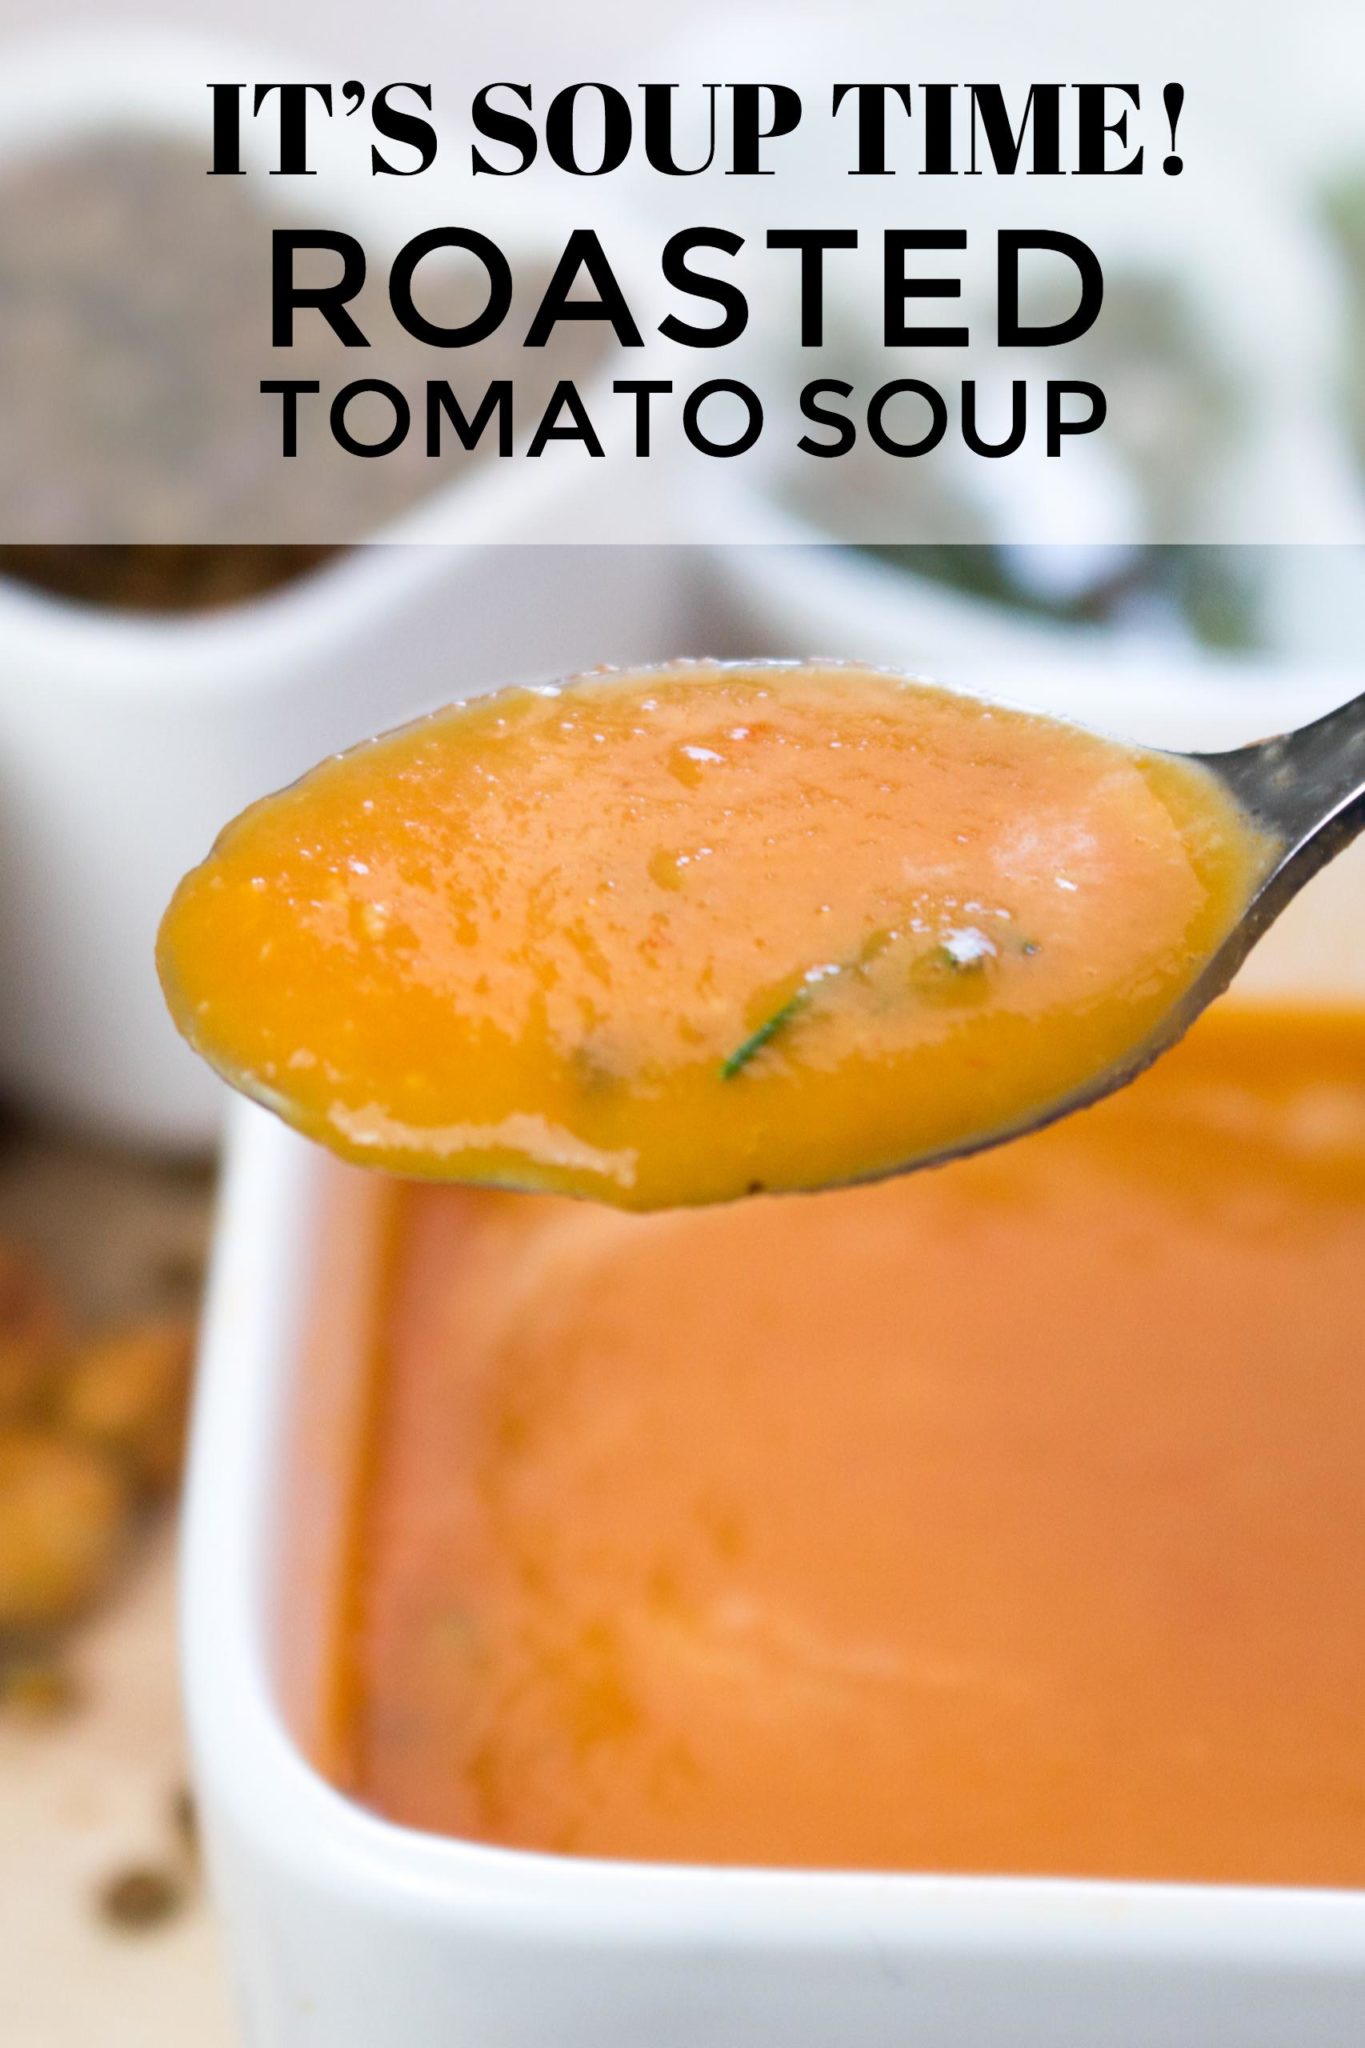 Smooth roasted tomato soup is savory, so easy and delicious. Your family will ask for this soup over and over again. Great for Thanksgiving or anytime.www.veganglutenfreelife.com/roasted-tomato-soup/